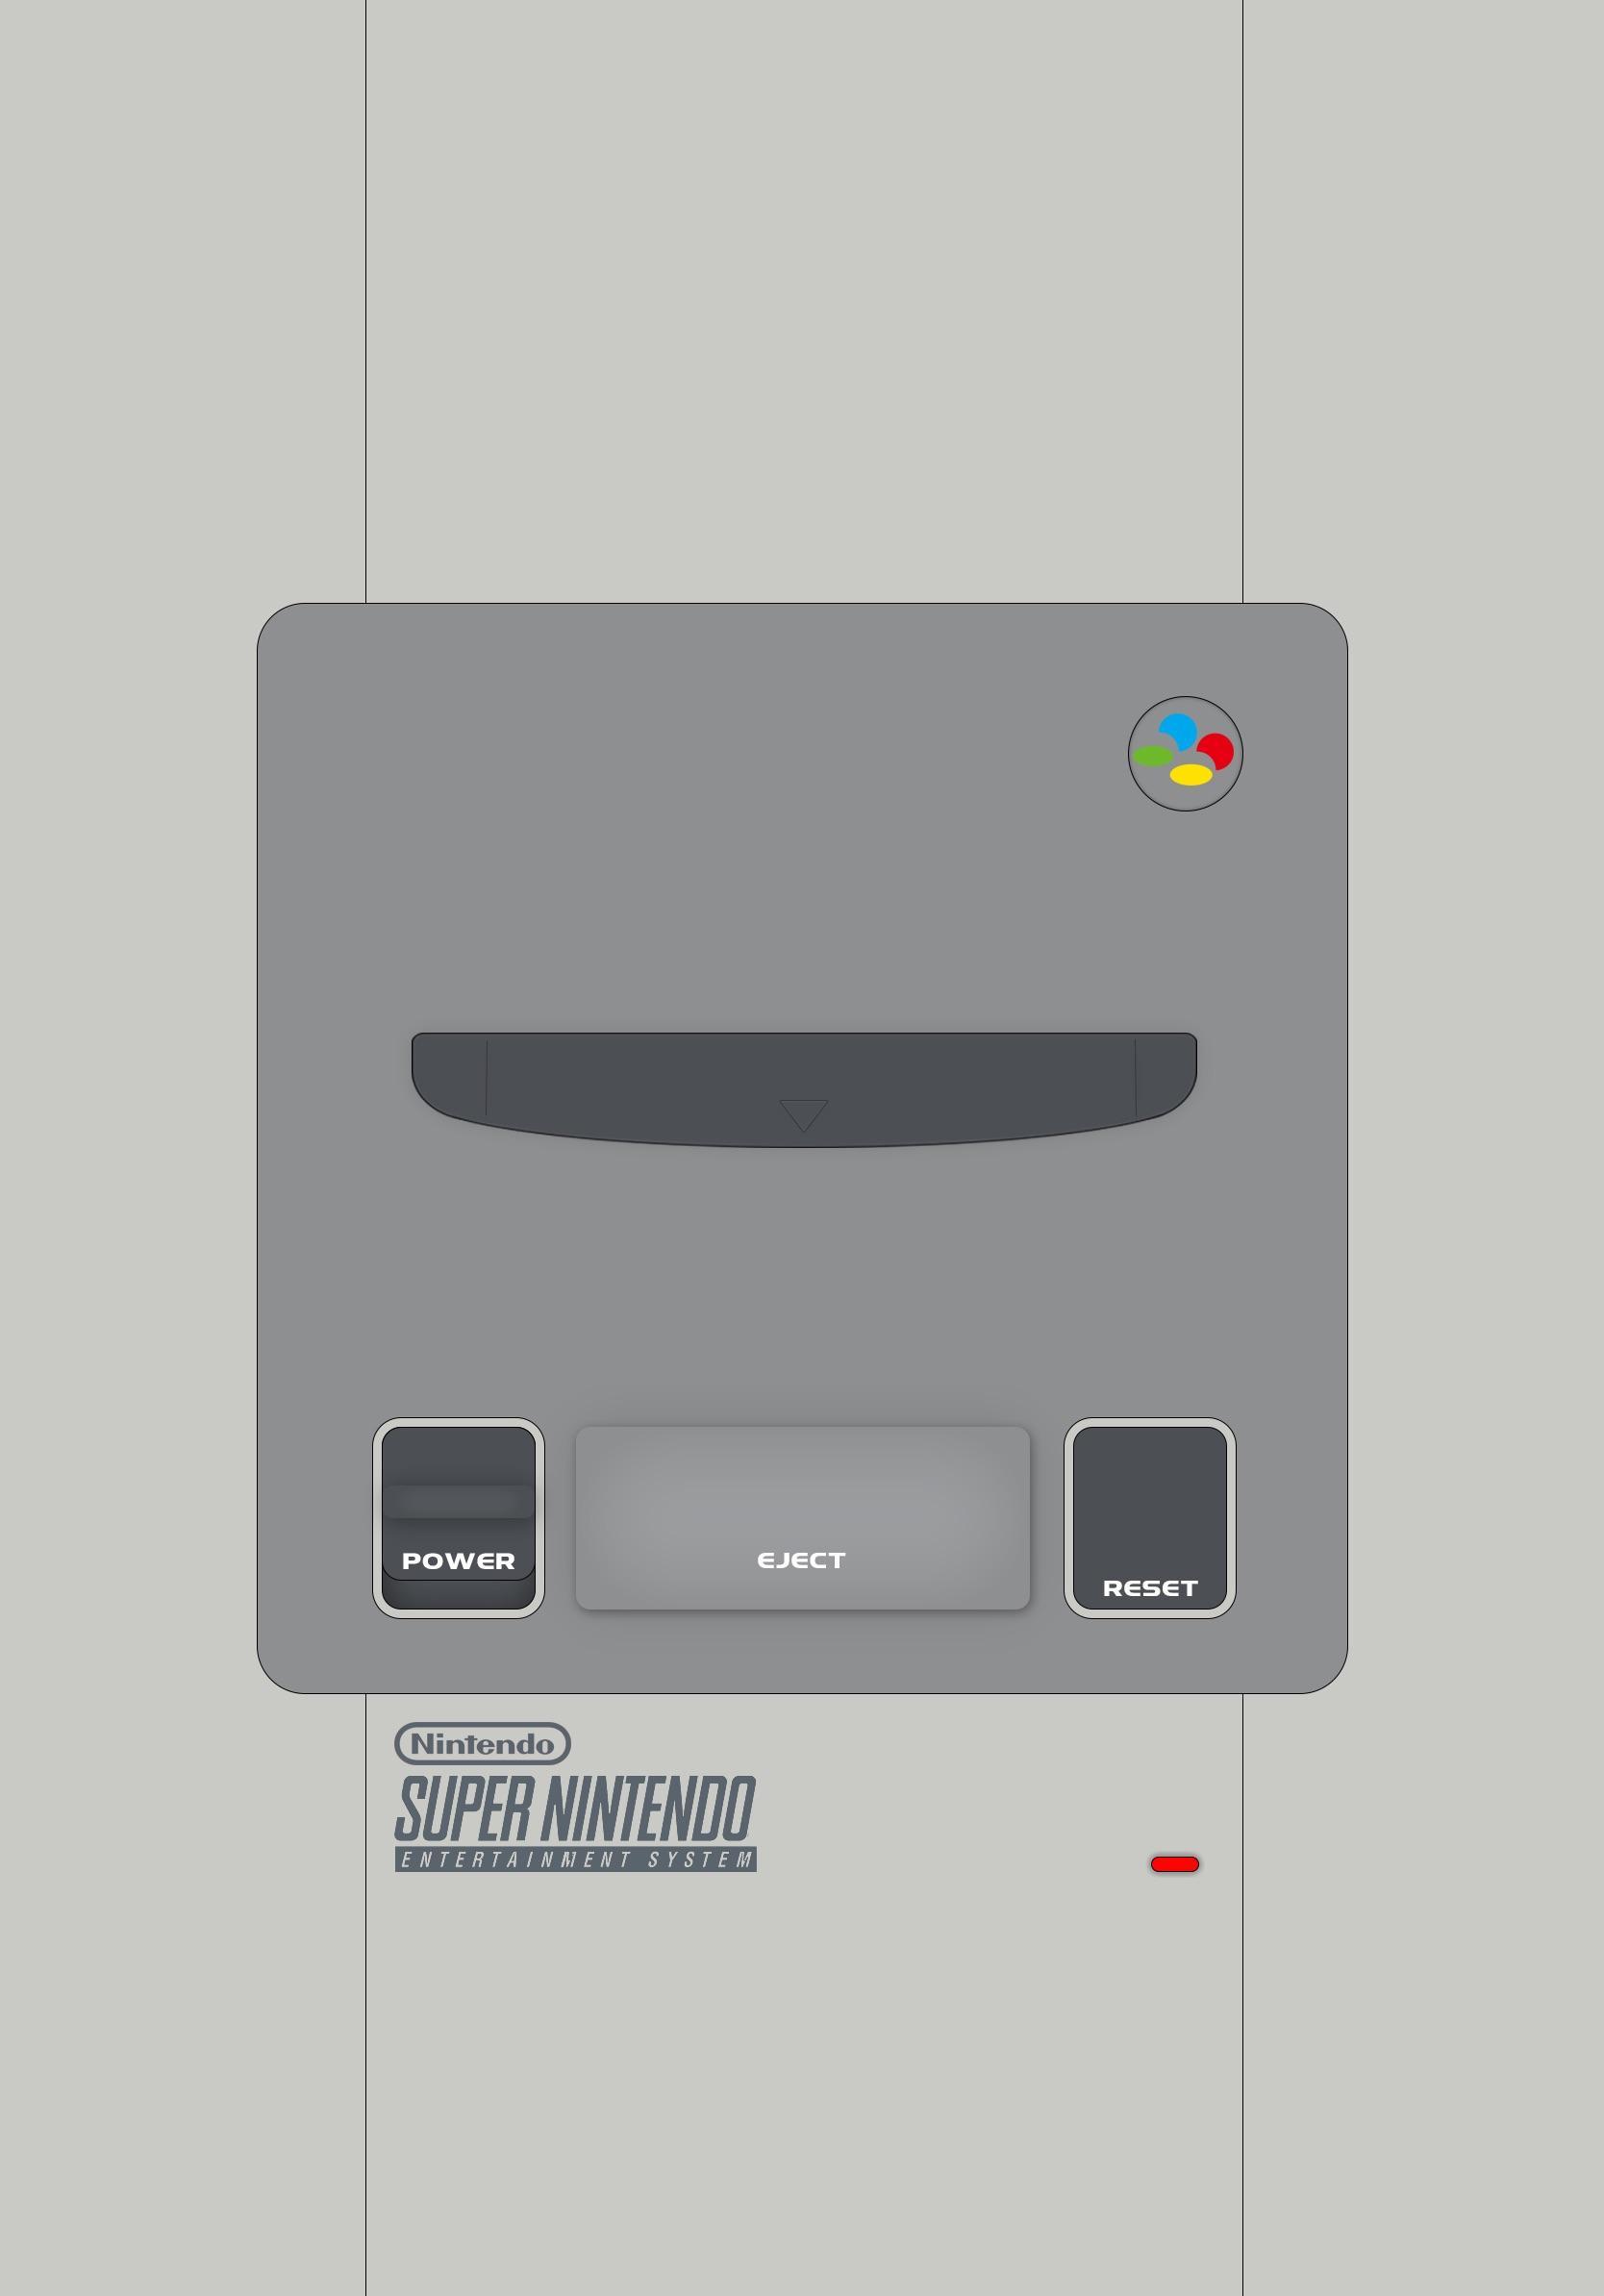 I wanted a snes wallpaper for my iPad. I could only find controllers, not the actual console, so I made one. If anyone's interested